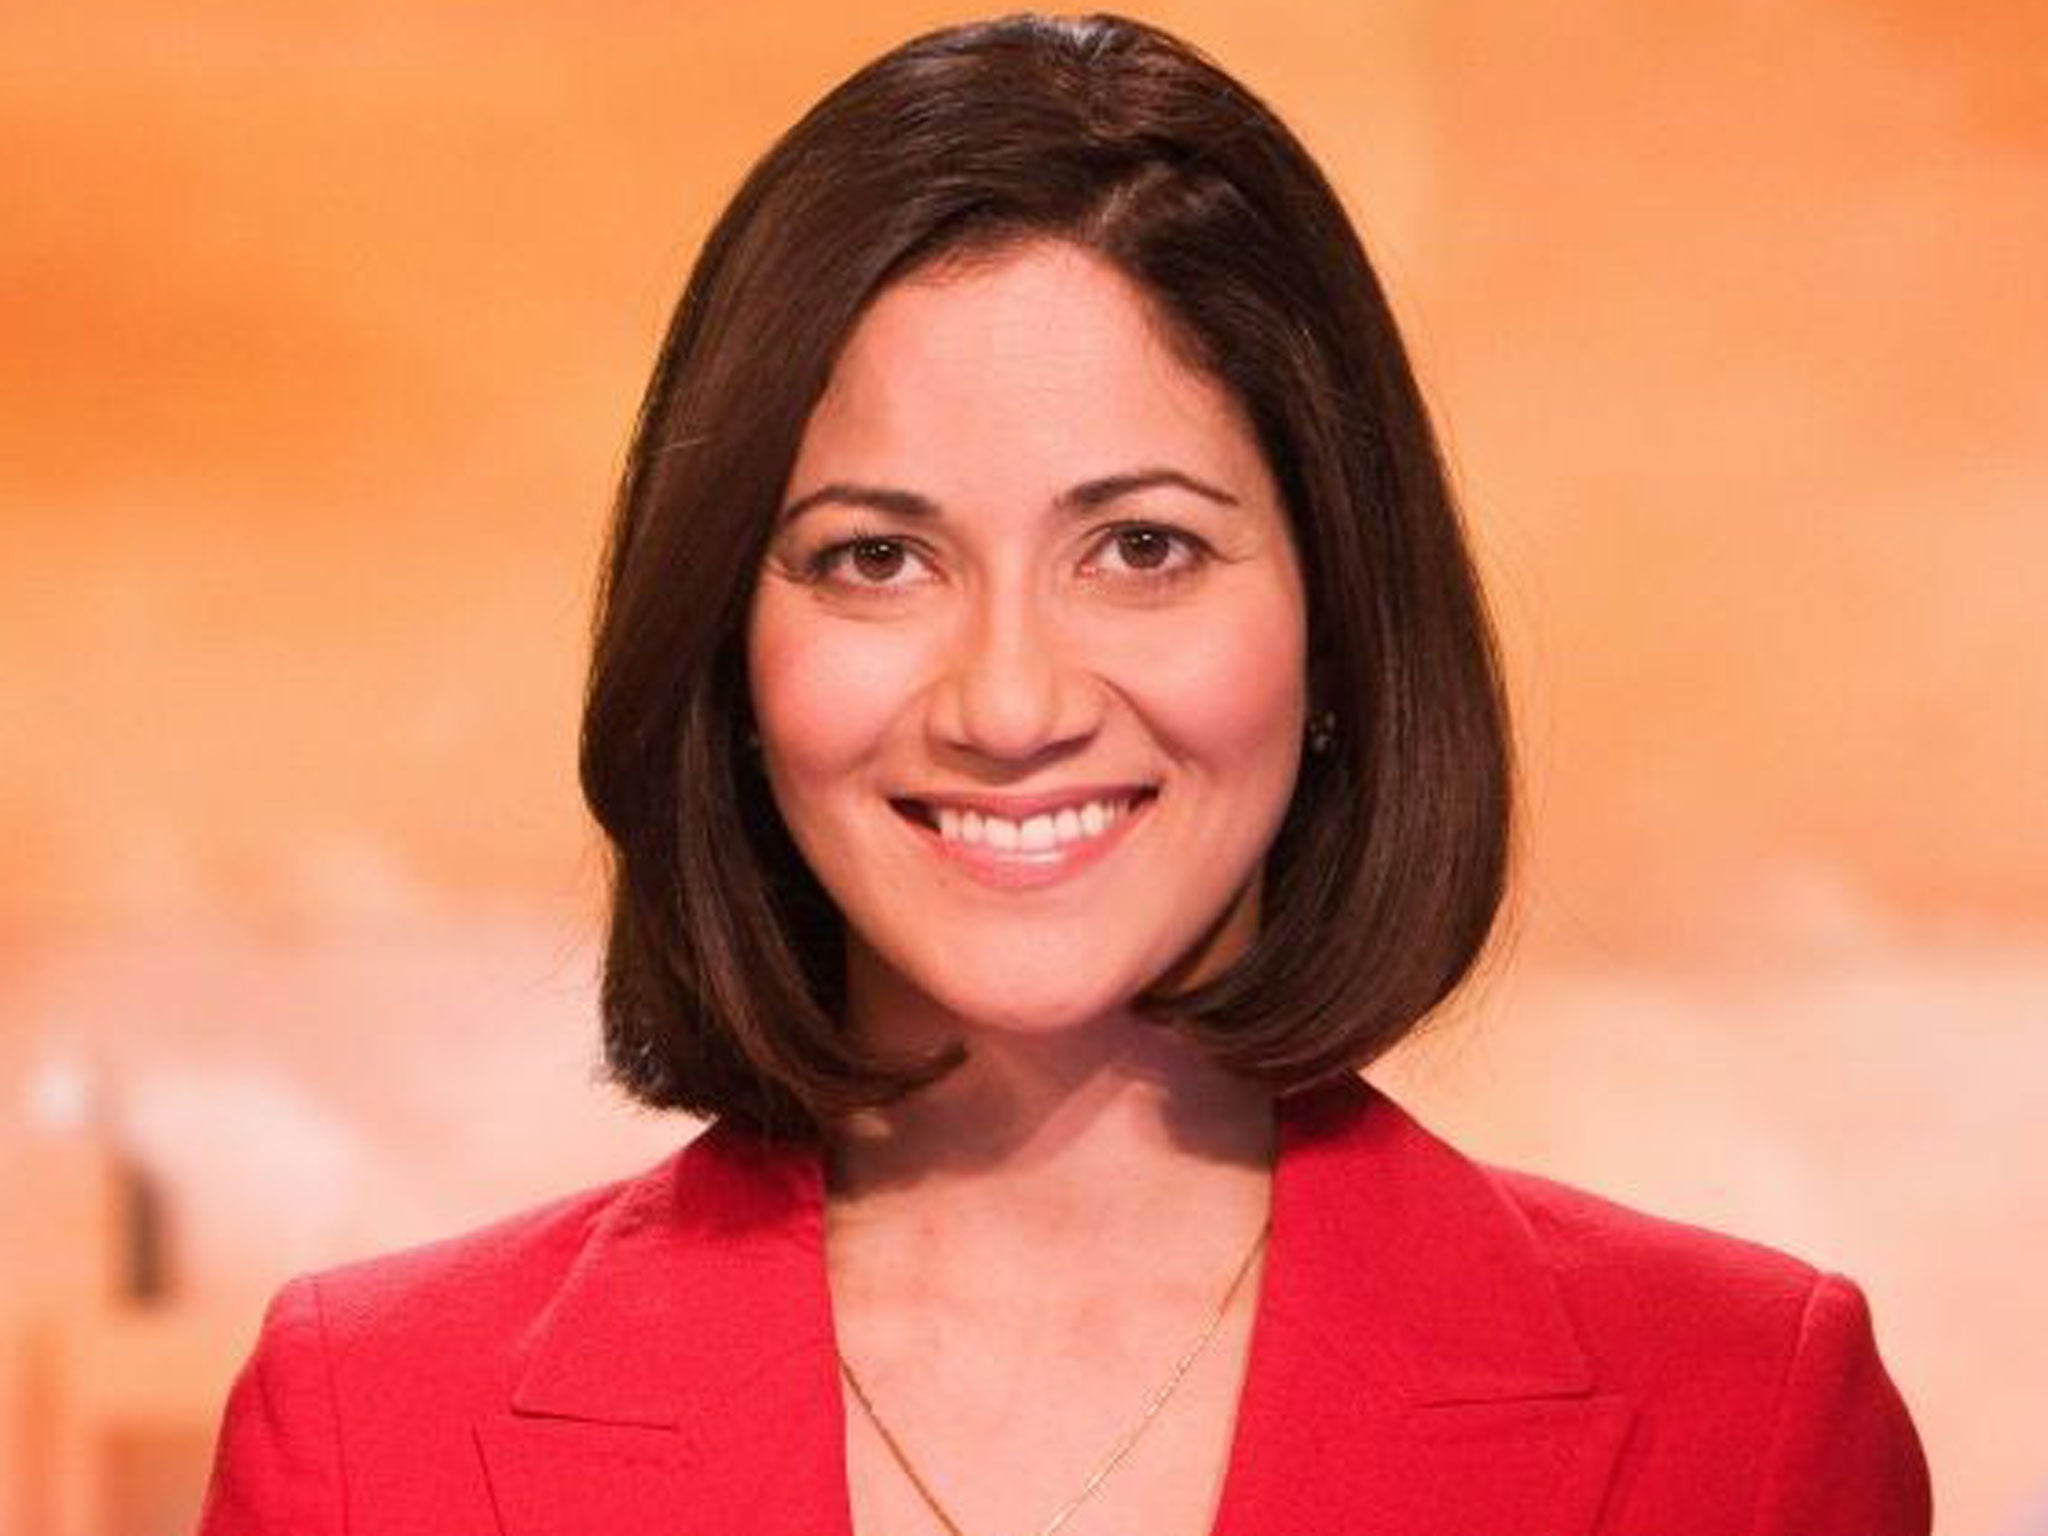 Mishal Husain will join presenters on BBC Radio 4's Today programme